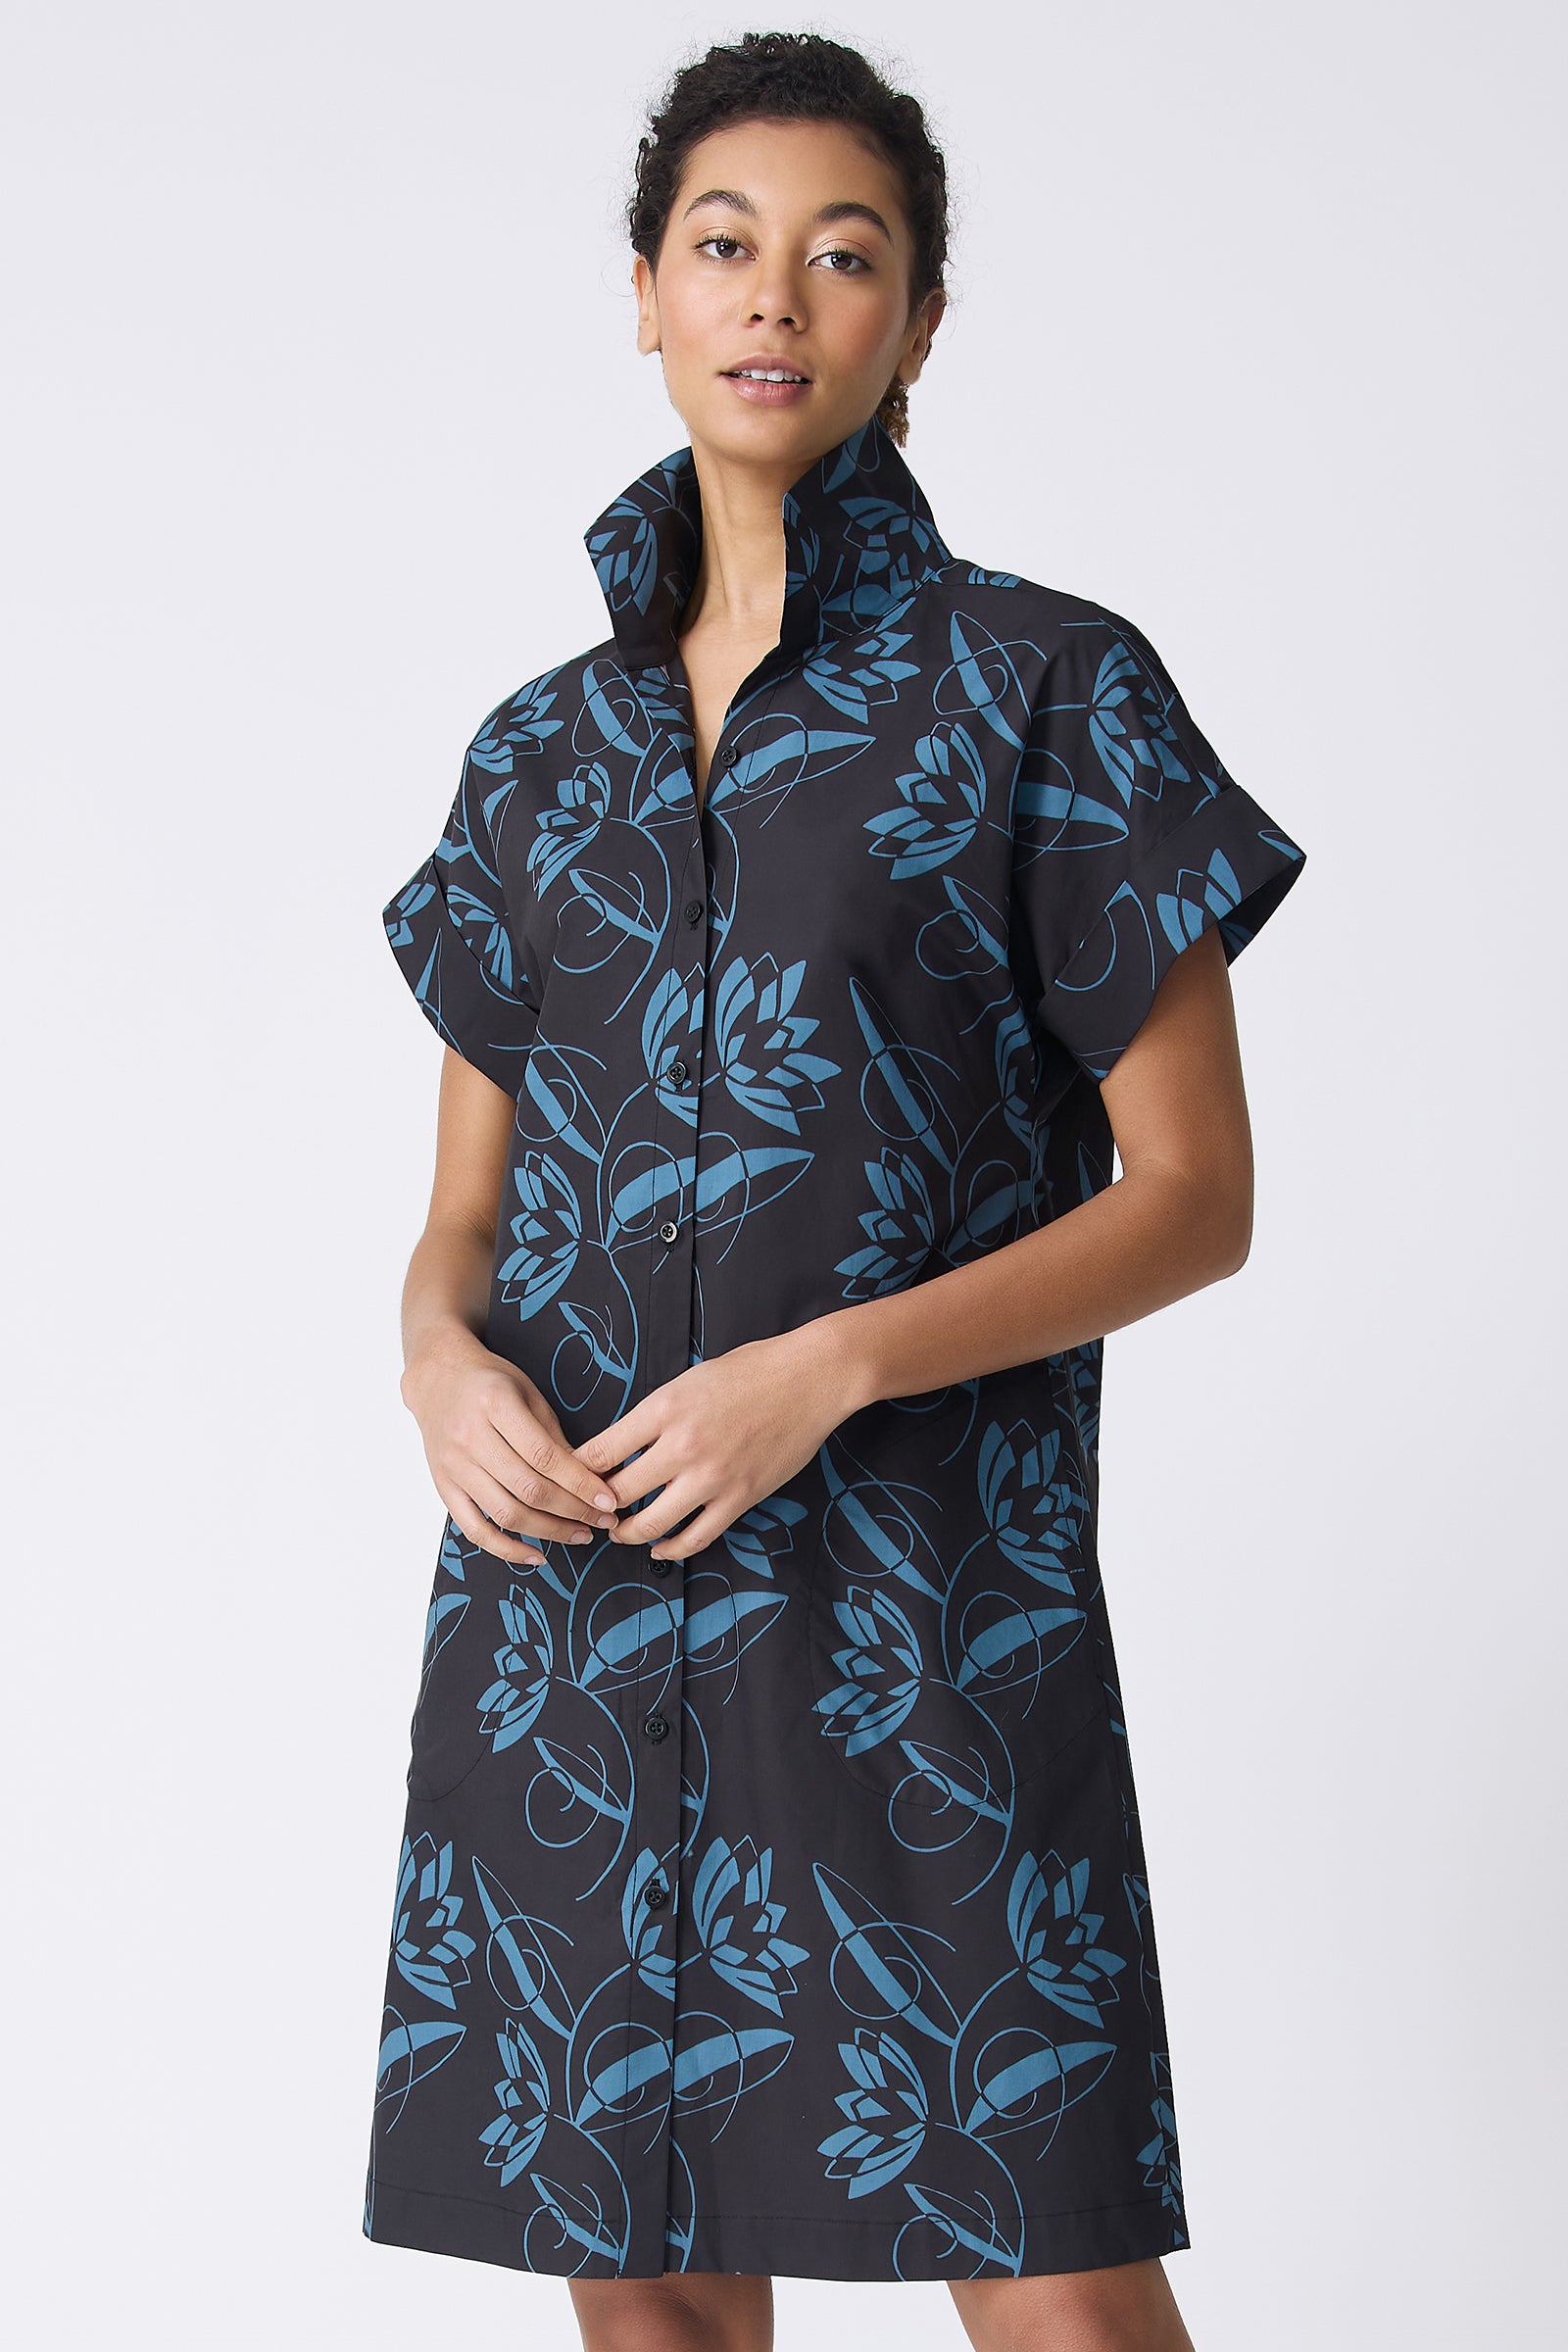 Kal Rieman Holly Kimono Dress in Lotus Print on model with hands in front of body front view